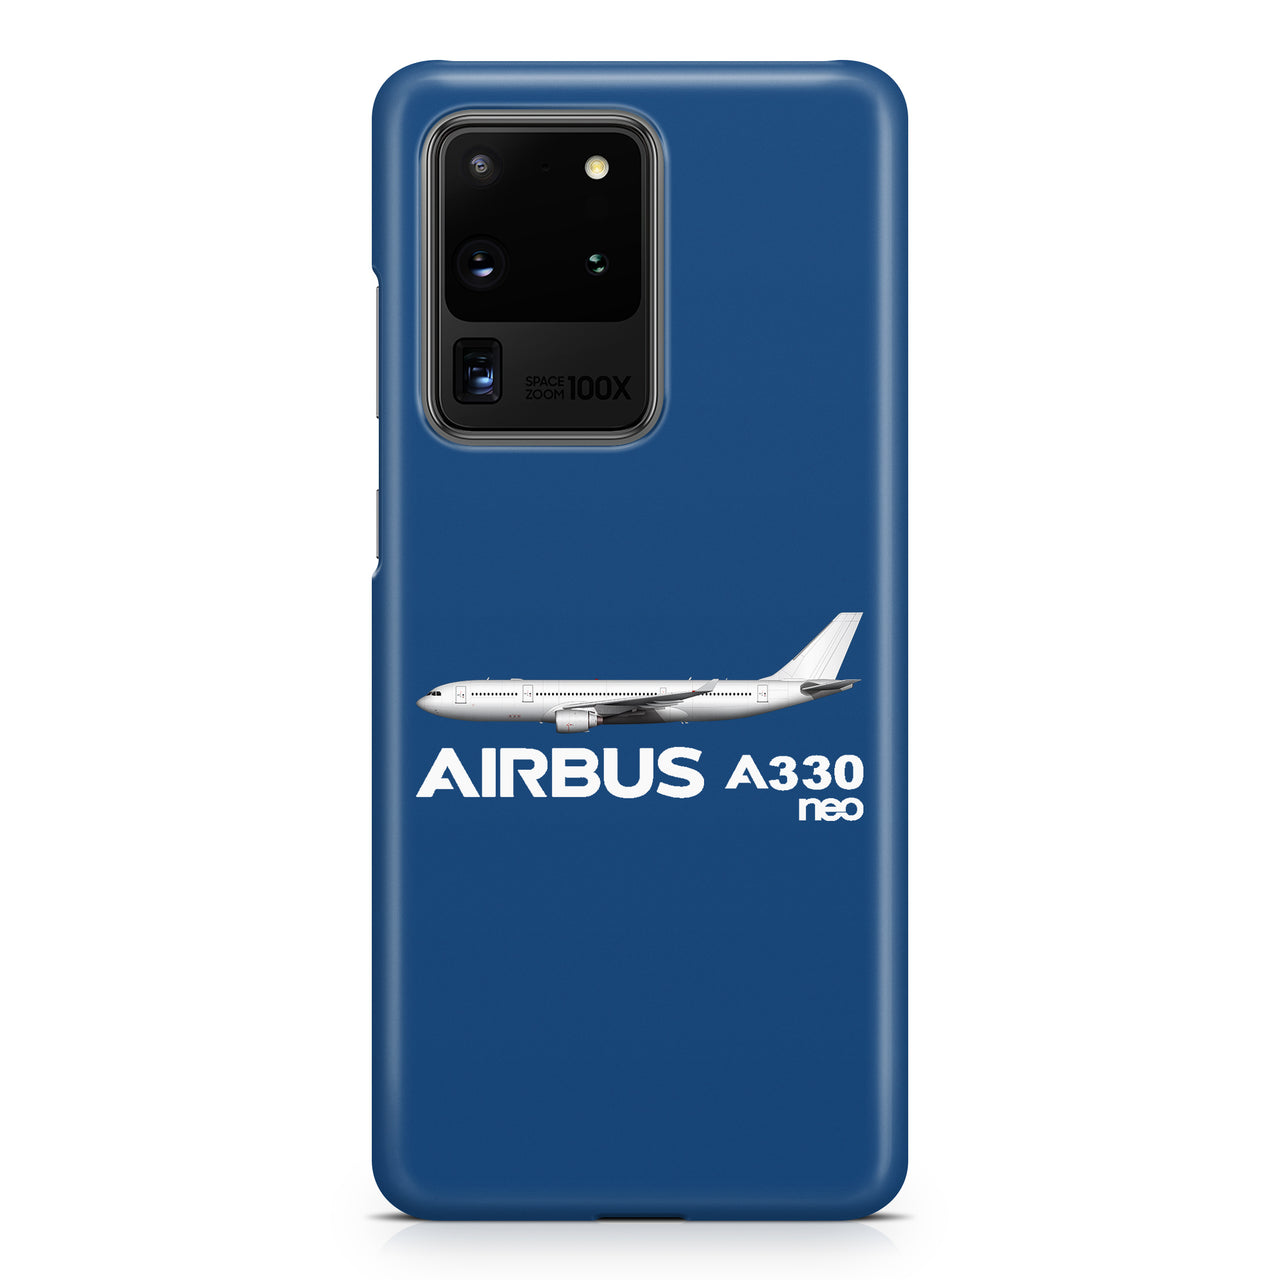 The Airbus A330neo Samsung A Cases